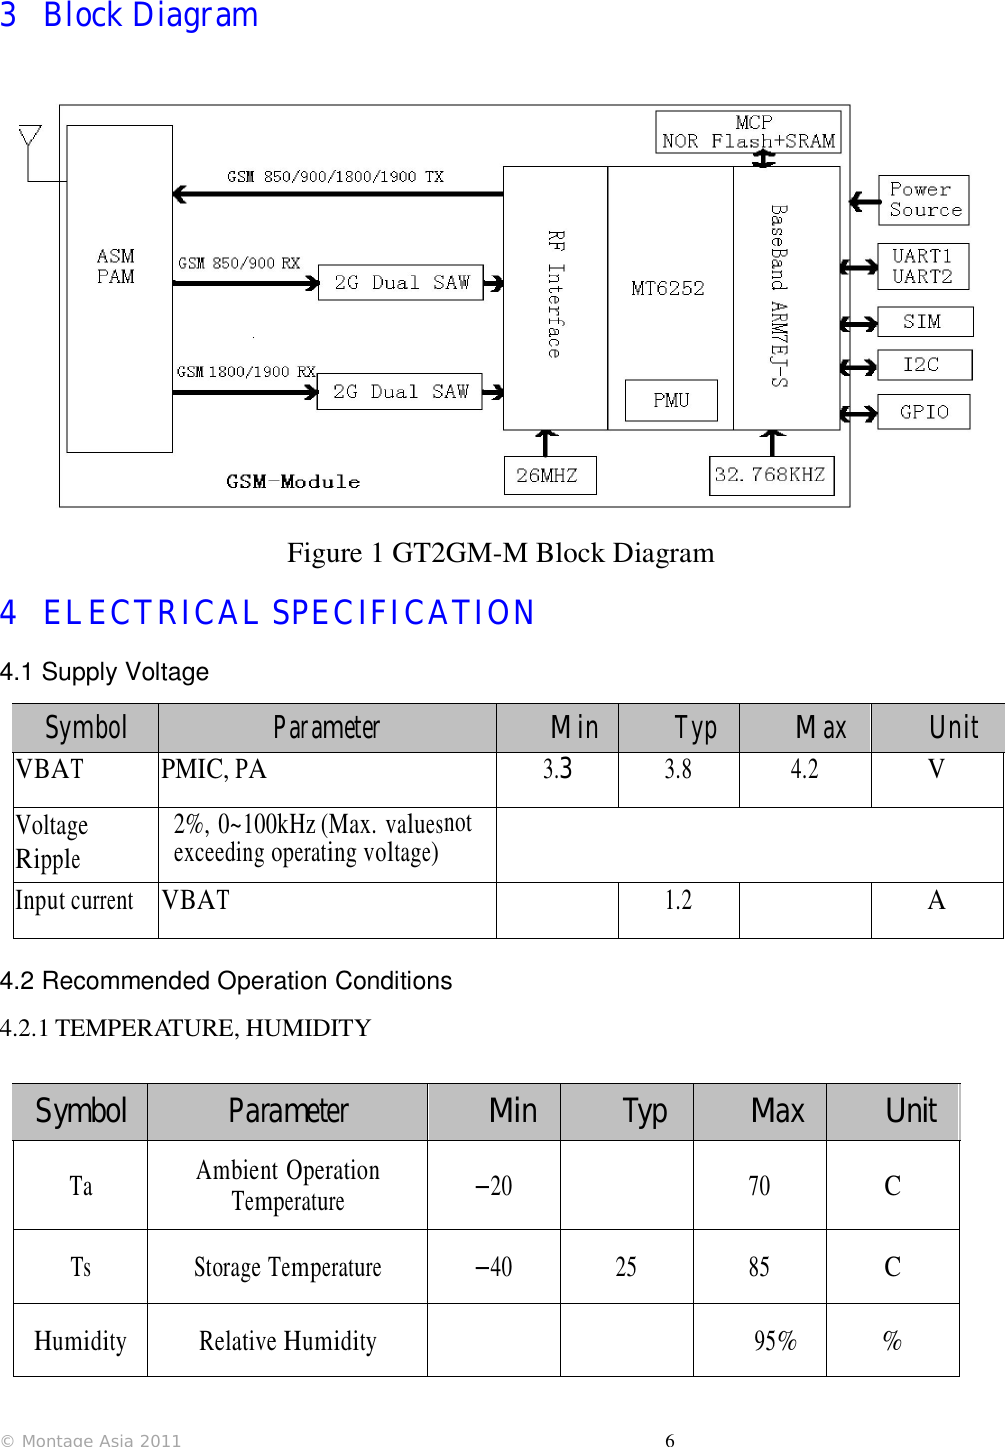                         © Montage Asia 2011                                       6 3 Block Diagram                Figure 1 GT2GM-M Block Diagram 4 ELECTRICAL SPECIFICATION   4.1 Supply Voltage Symbol Parameter Min Typ Max Unit VBAT PMIC, PA 3.3 3.8 4.2 V Voltage Ripple 2%, 0~100kHz (Max. valuesnot exceeding operating voltage)  Input current VBAT  1.2  A  4.2 Recommended Operation Conditions 4.2.1 TEMPERATURE, HUMIDITY   Symbol Parameter Min Typ Max Unit Ta Ambient Operation Temperature —20  70 C Ts Storage Temperature —40 25 85 C Humidity Relative Humidity    95% %  